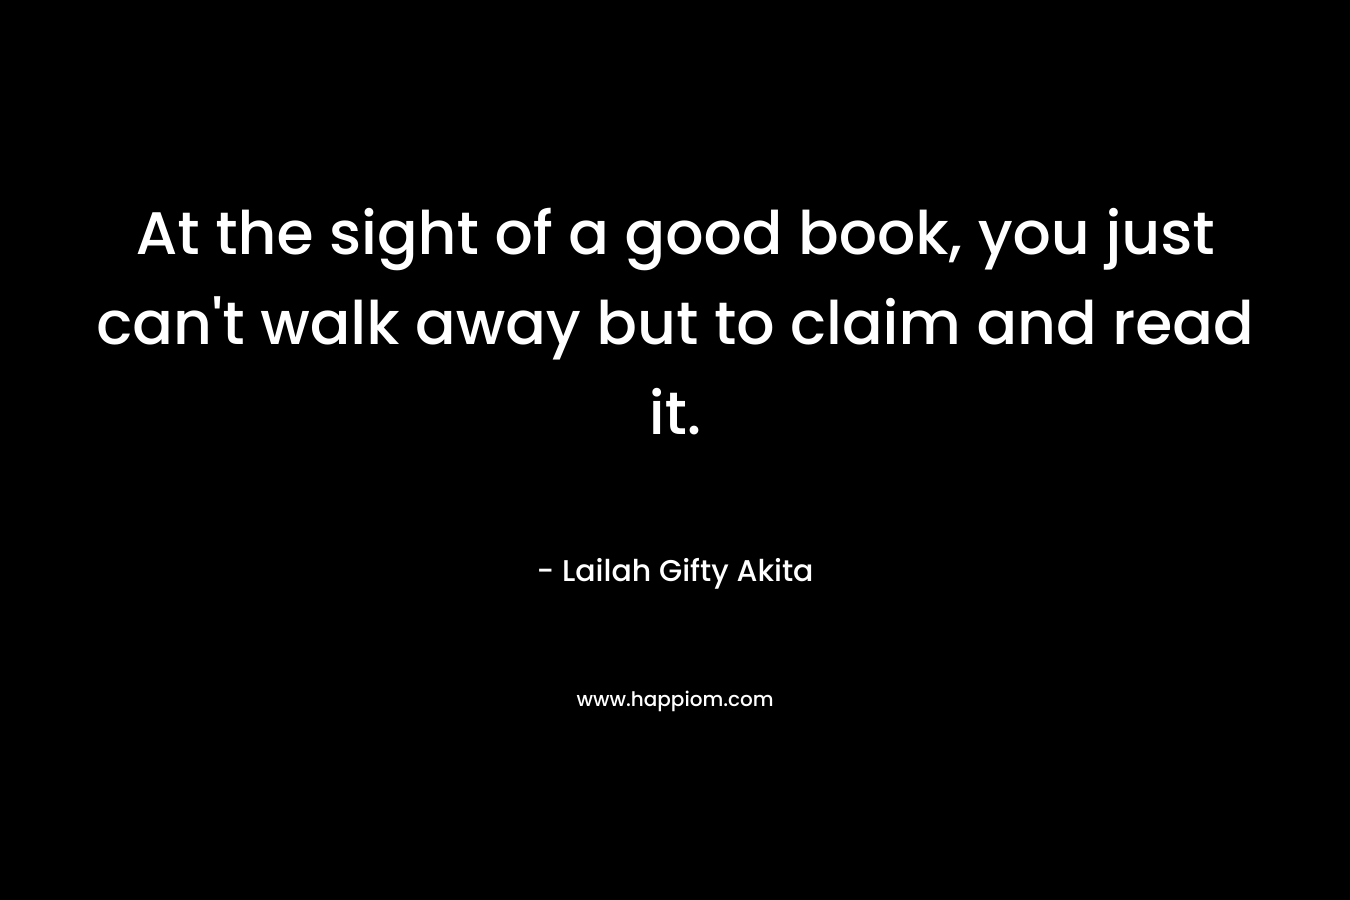 At the sight of a good book, you just can't walk away but to claim and read it.